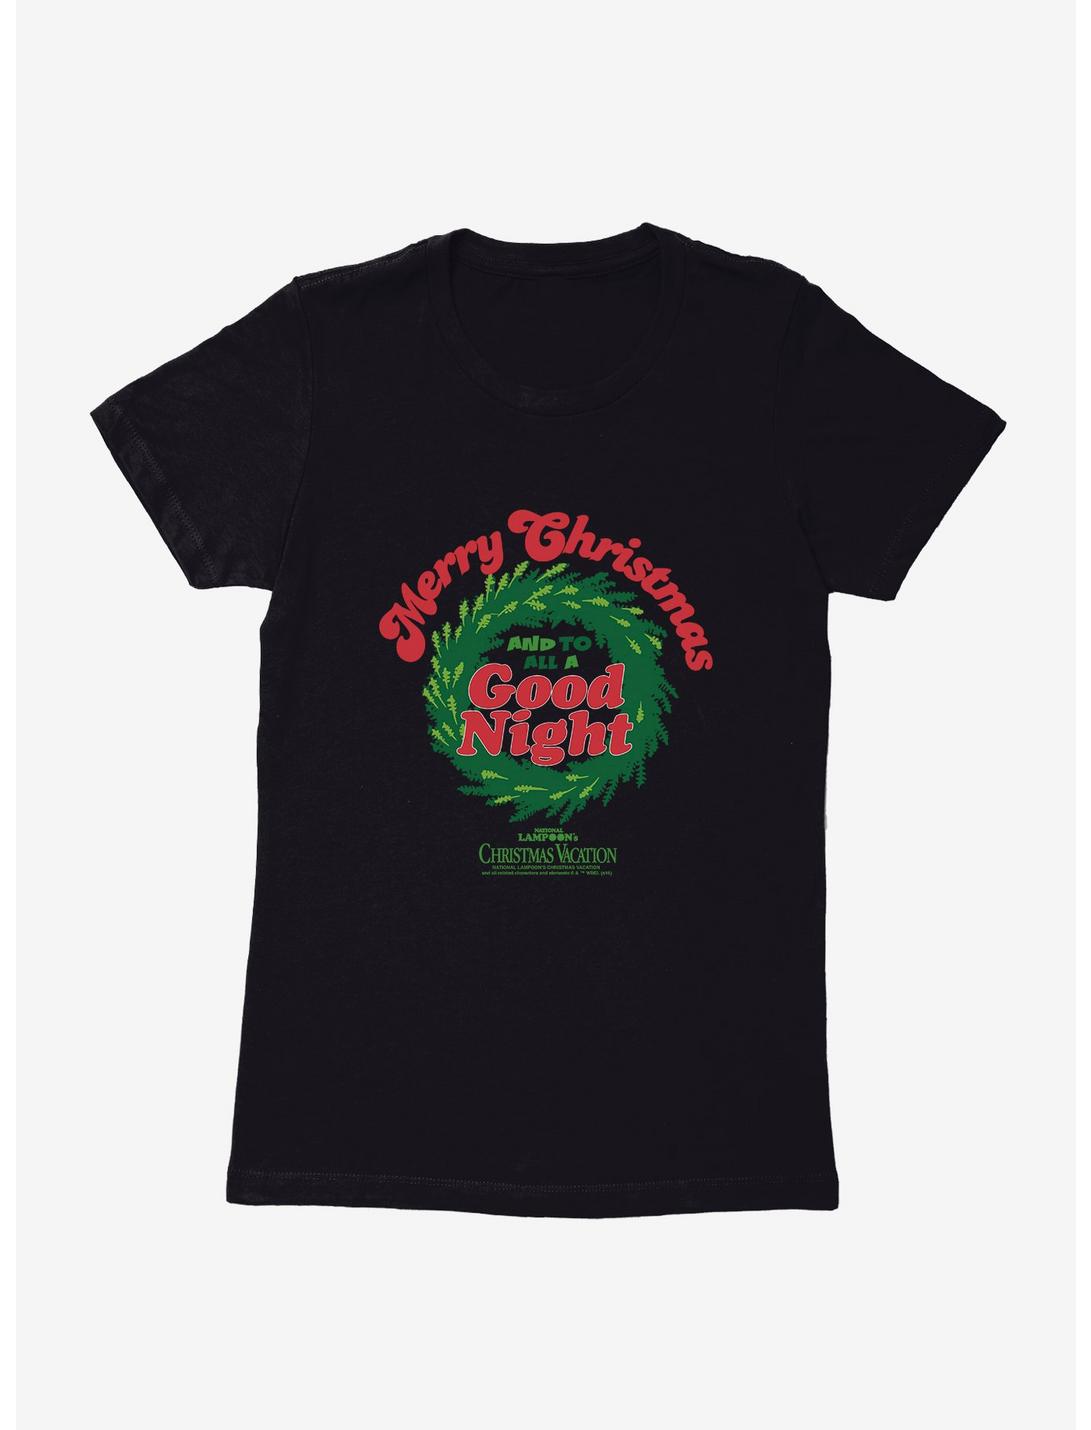 National Lampoon's Christmas Vacation To All A Good Night Womens T-Shirt, BLACK, hi-res